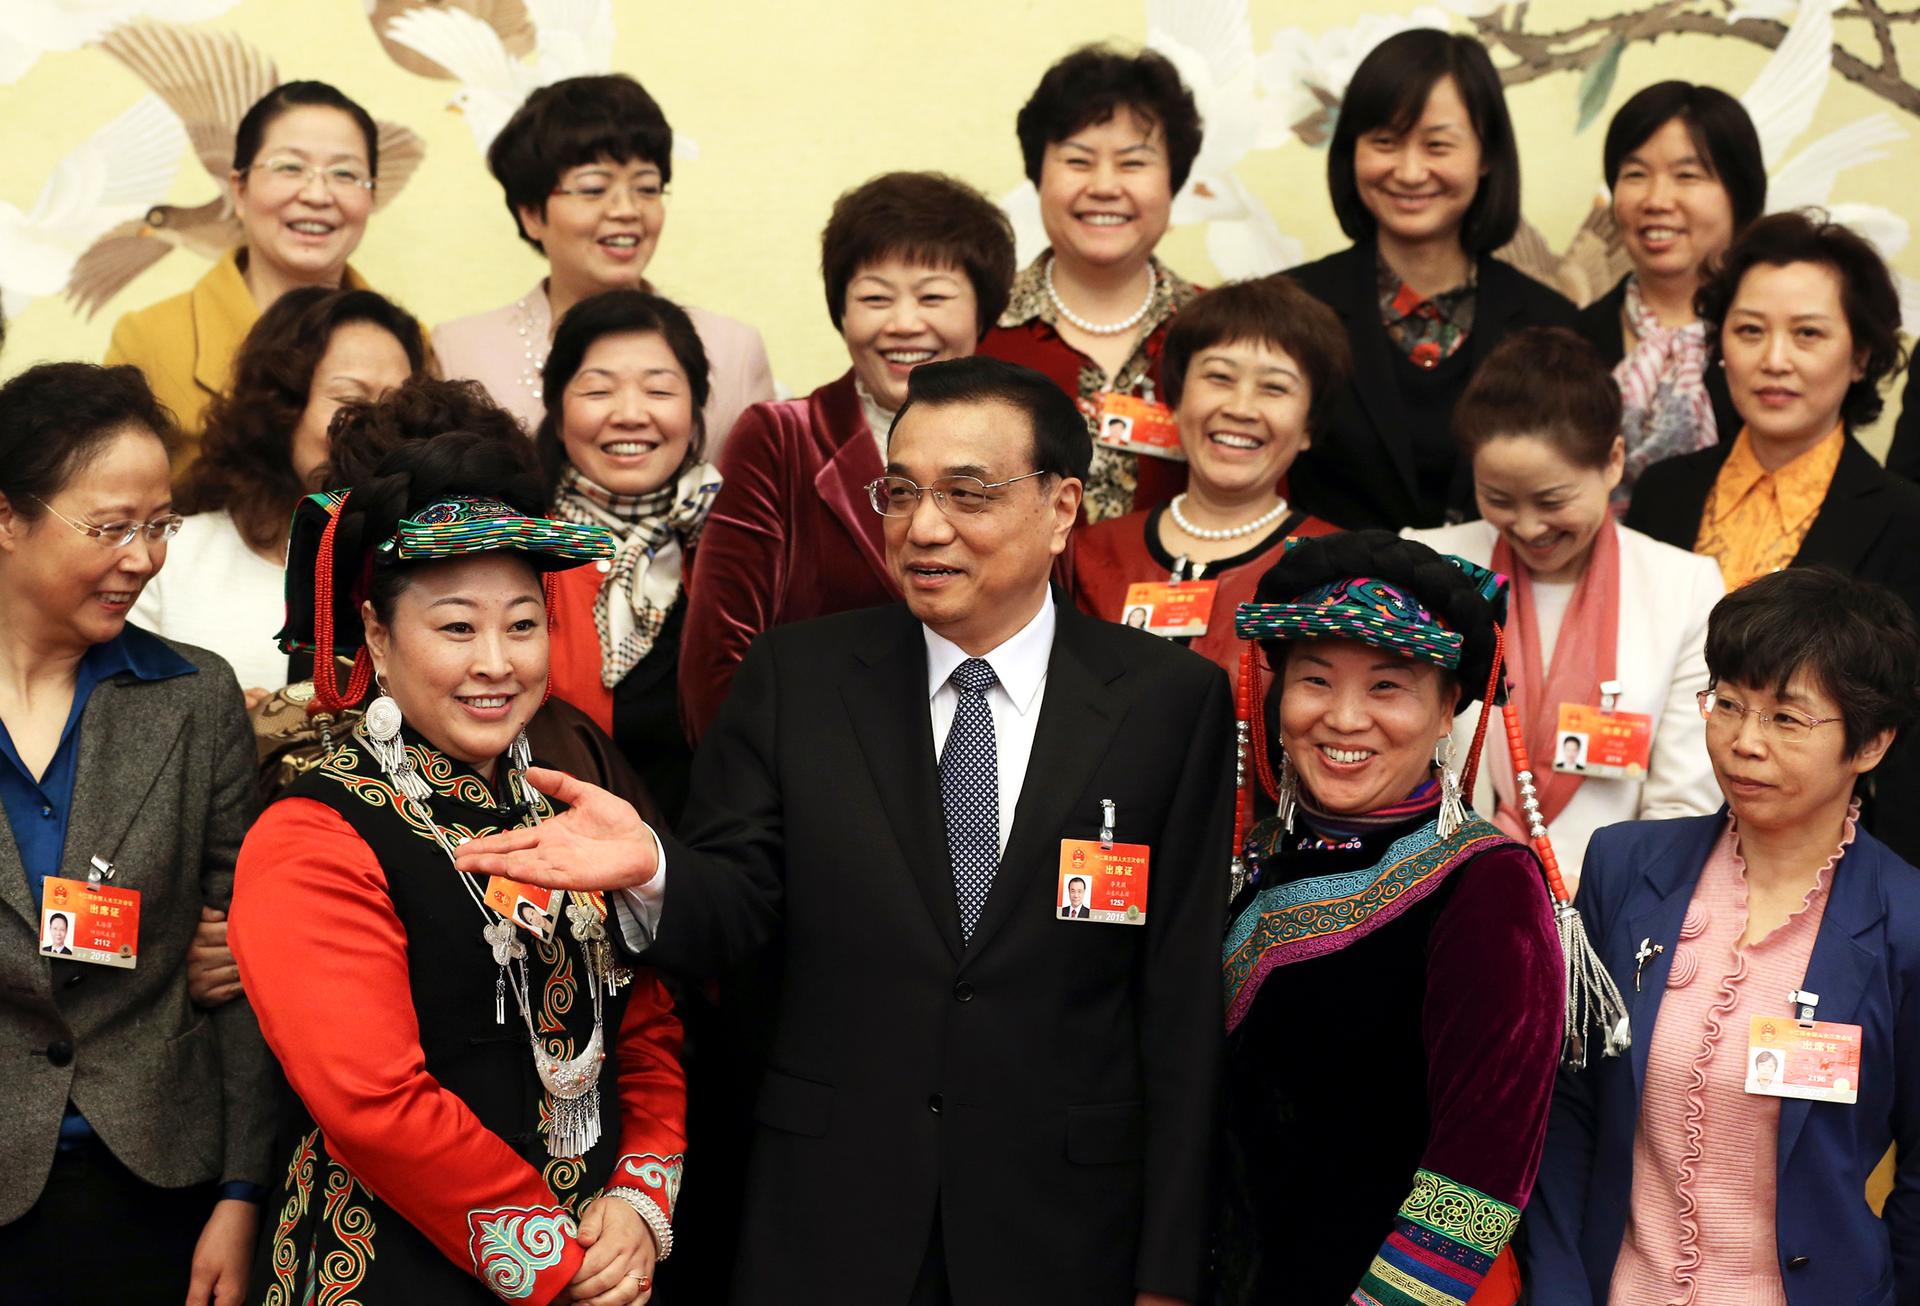 Chinese Premier Li Keqiang (C) poses with female delegates at the annual session of the National People's Congress (NPC) on International Women's Day in Beijing on March 8, 2015.